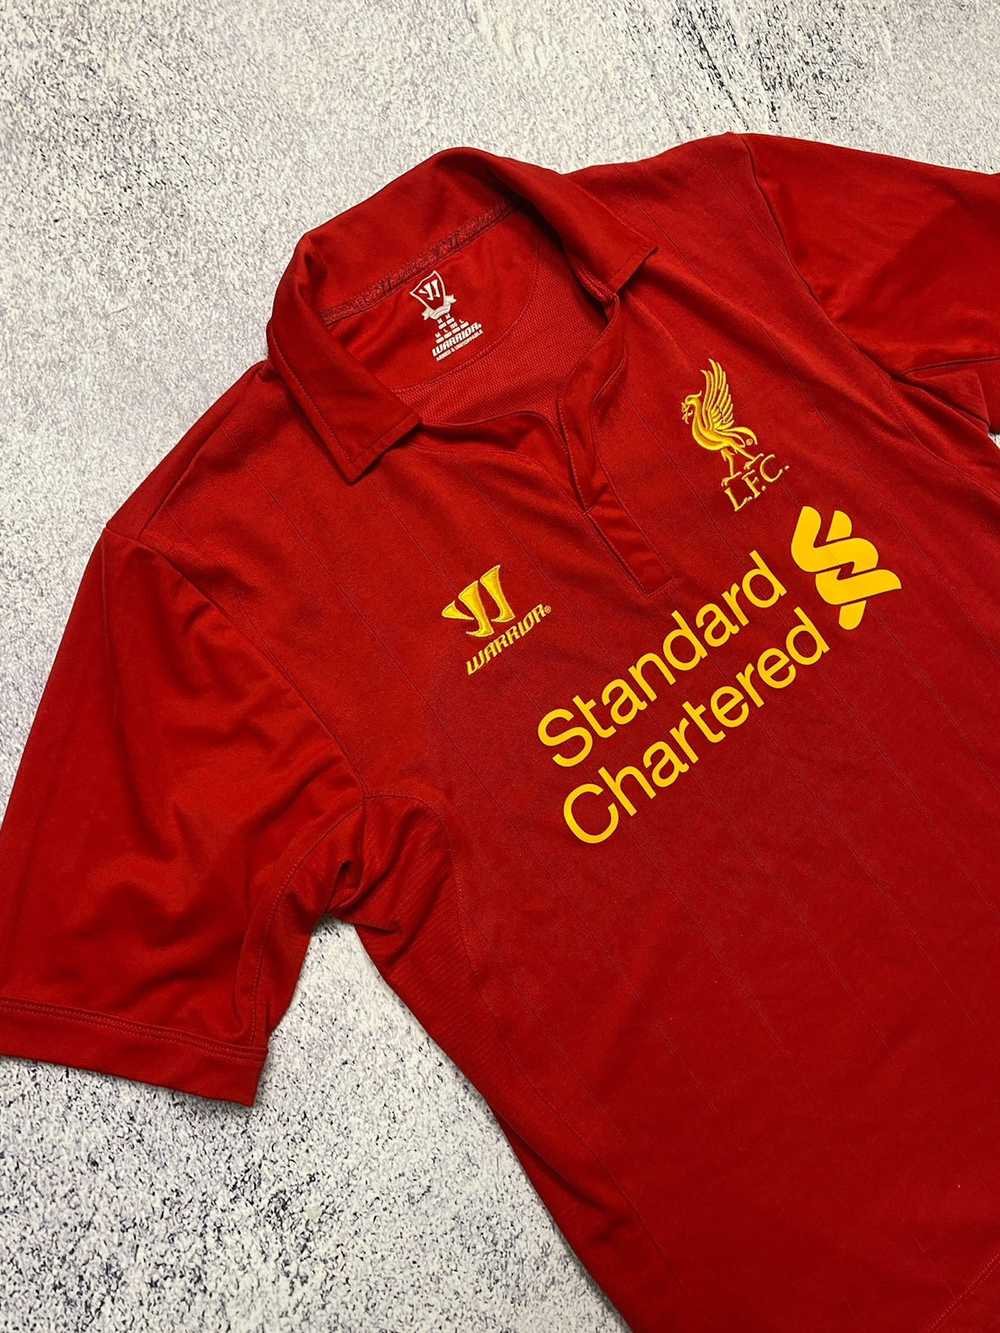 Jersey × Liverpool × Soccer Jersey Liverpool 2012… - image 3